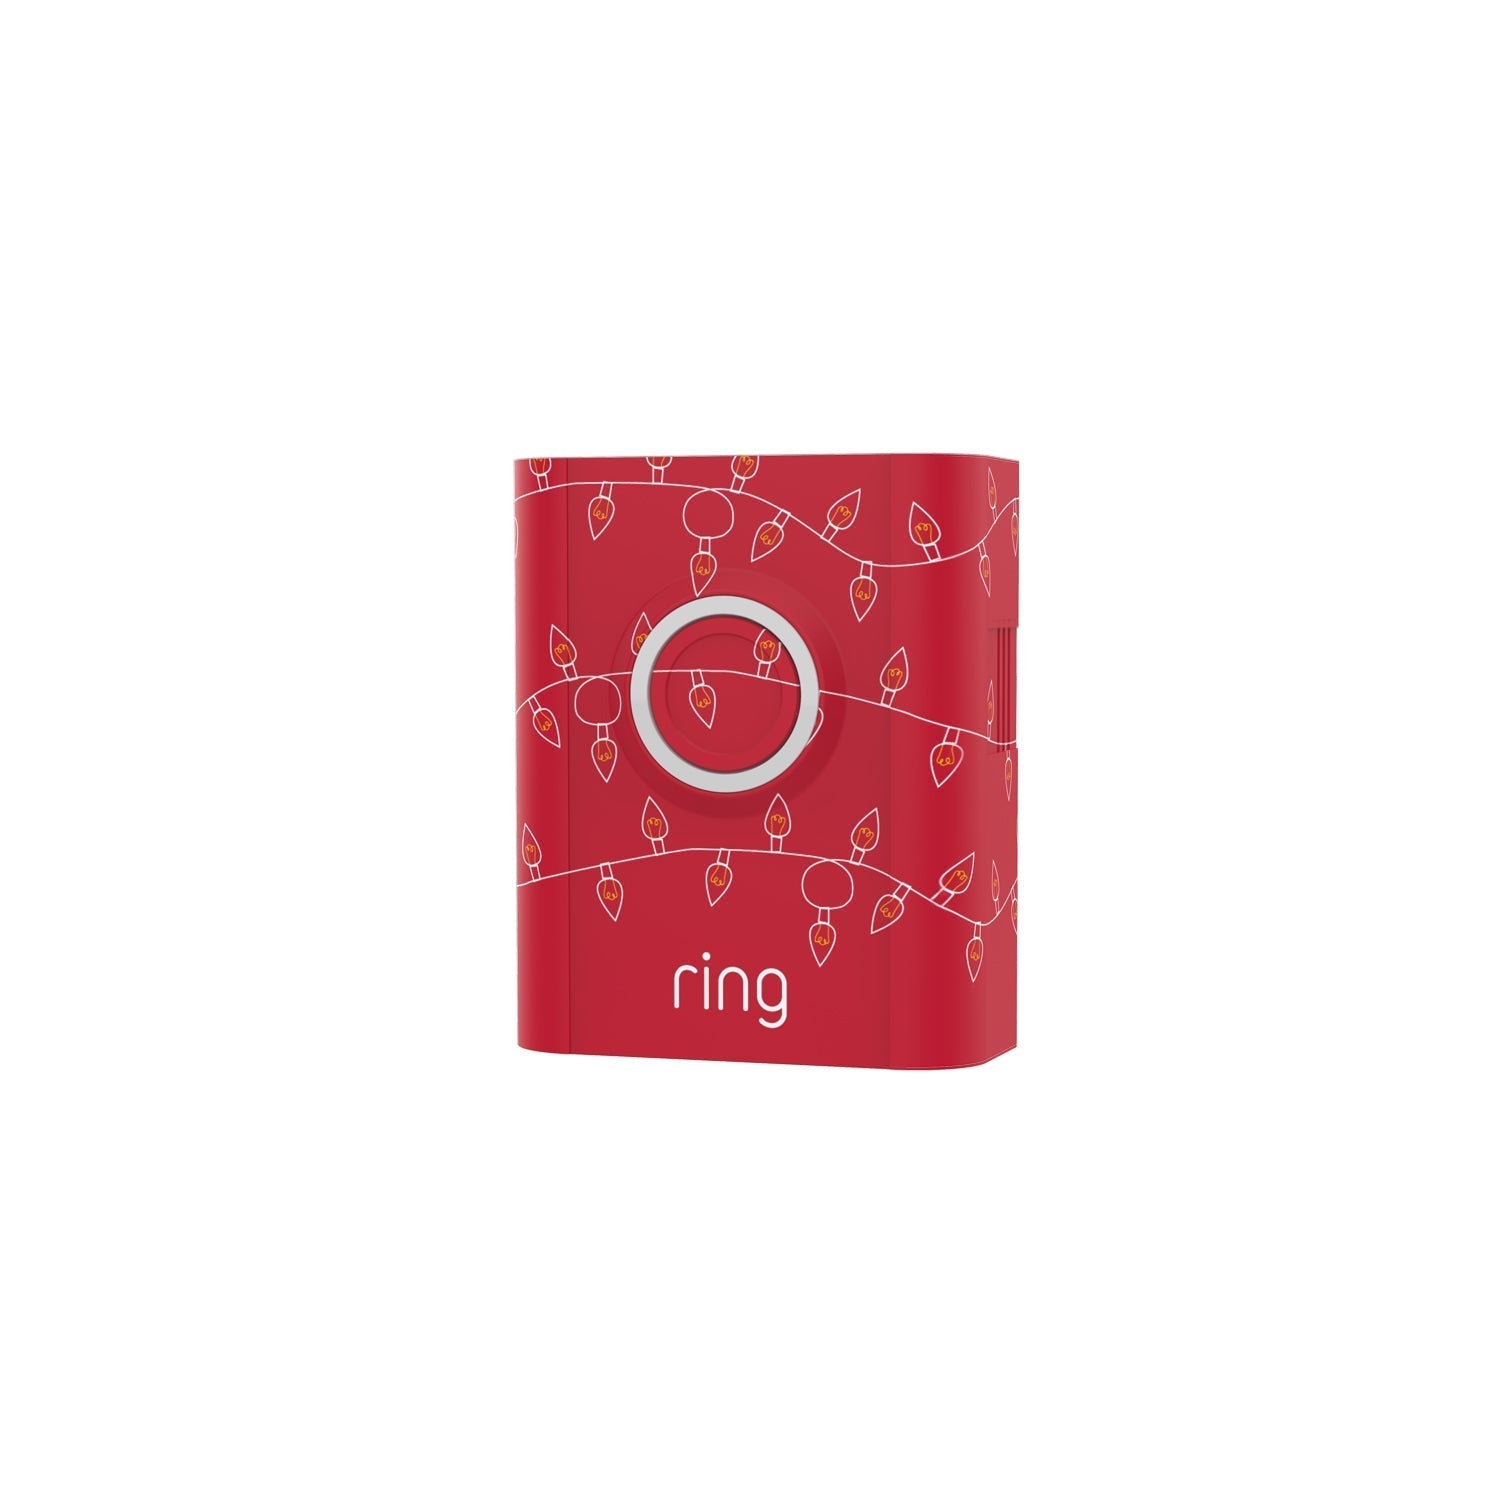 Holiday Interchangeable Faceplate (for Video Doorbell 3, Video Doorbell 3 Plus, Video Doorbell 4, Battery Doorbell Plus) - Christmas Lights Red:Holiday Interchangeable Faceplate (for Video Doorbell 3, Video Doorbell 3 Plus, Video Doorbell 4, Battery Doorbell Plus)